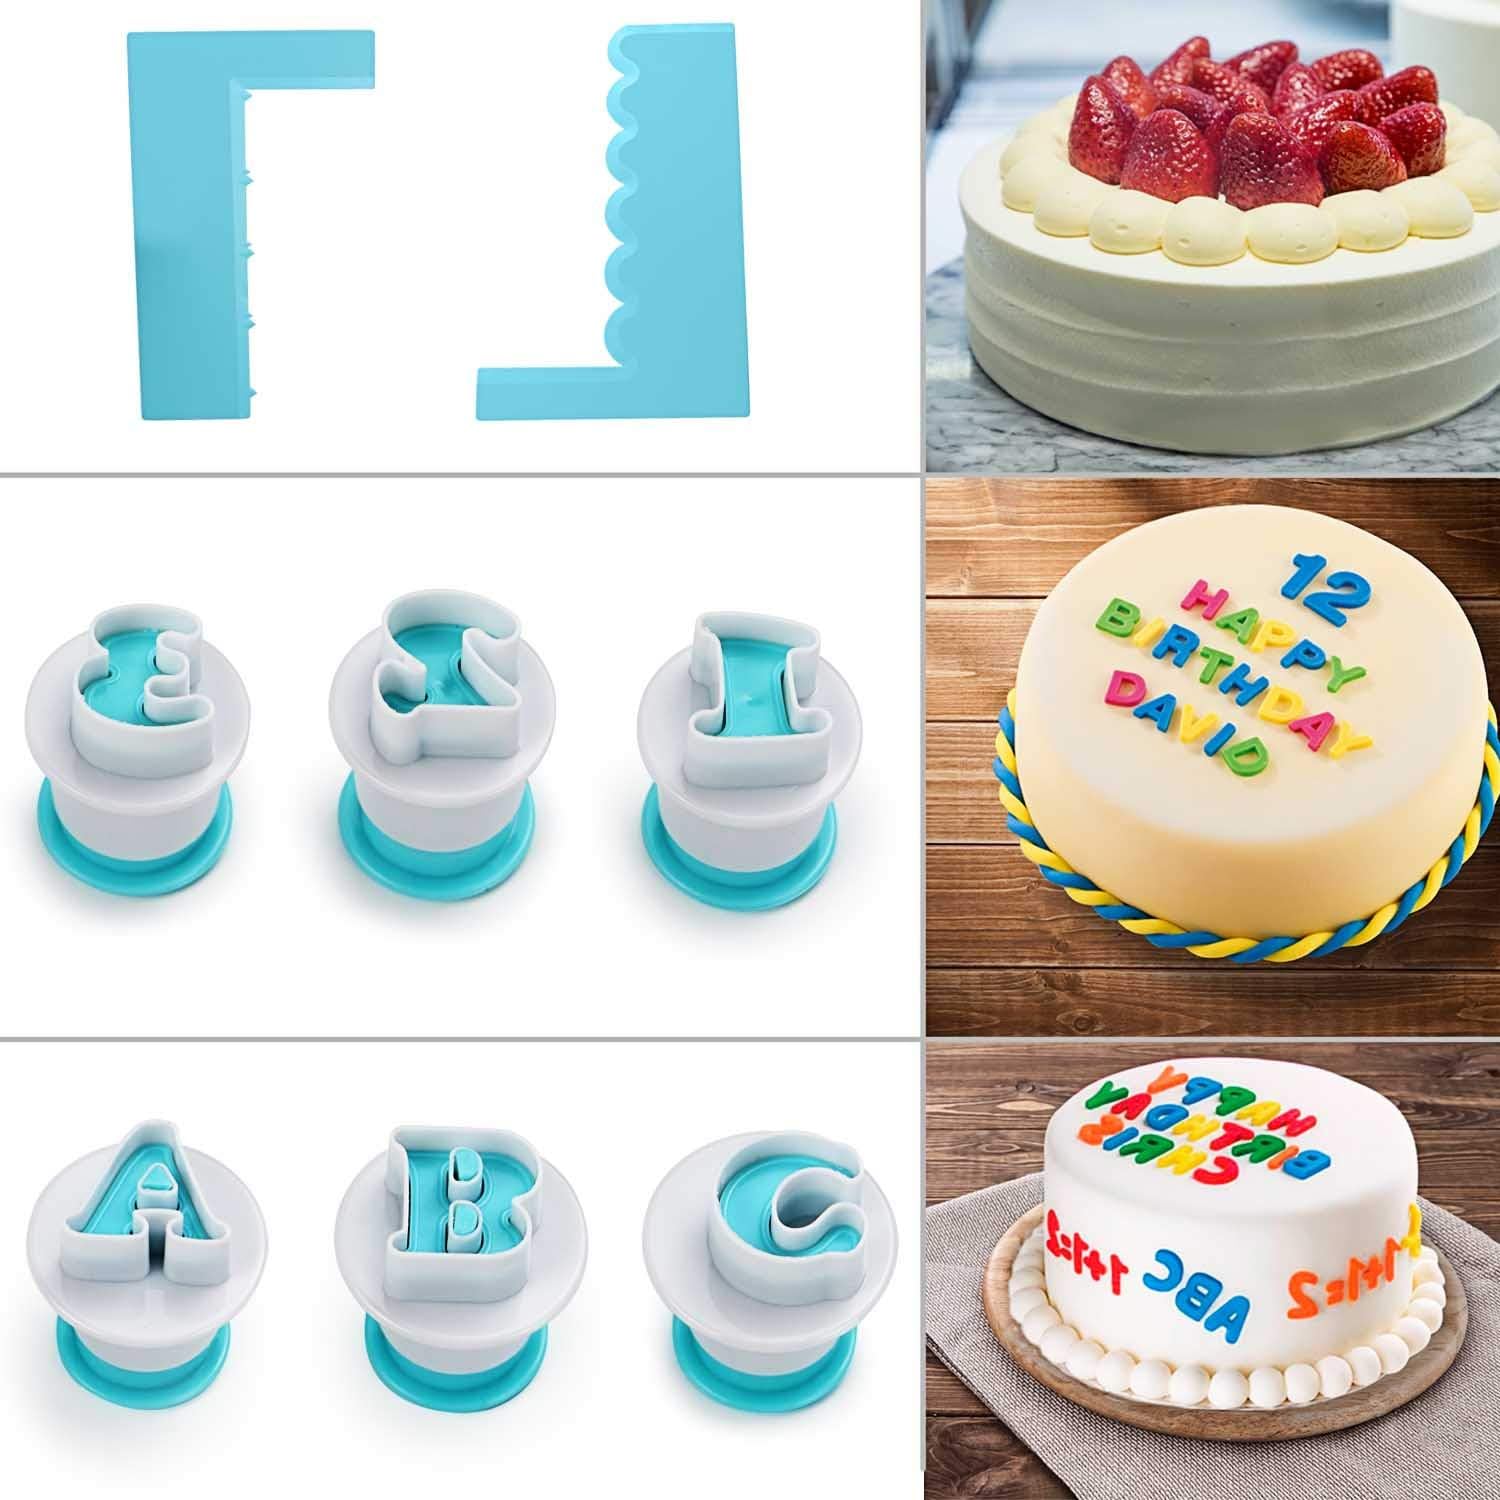 Cake Stamp Embossers for Fondant: How to Elevate Your Cakes with Custom Details